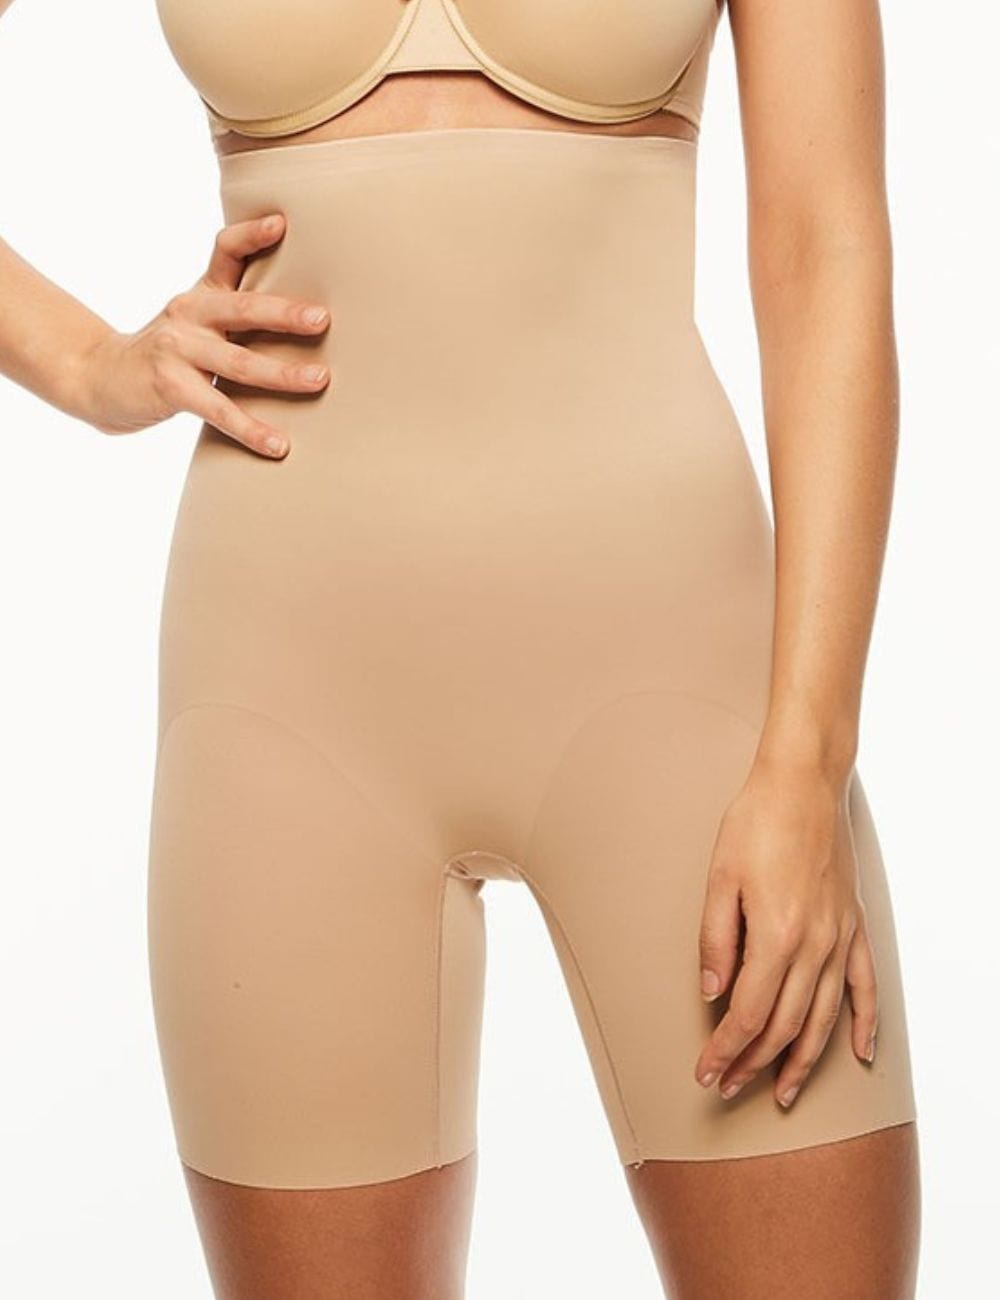 Unbelieveable Comfort Plus Size Torsette Thigh Slimmer by Naomi